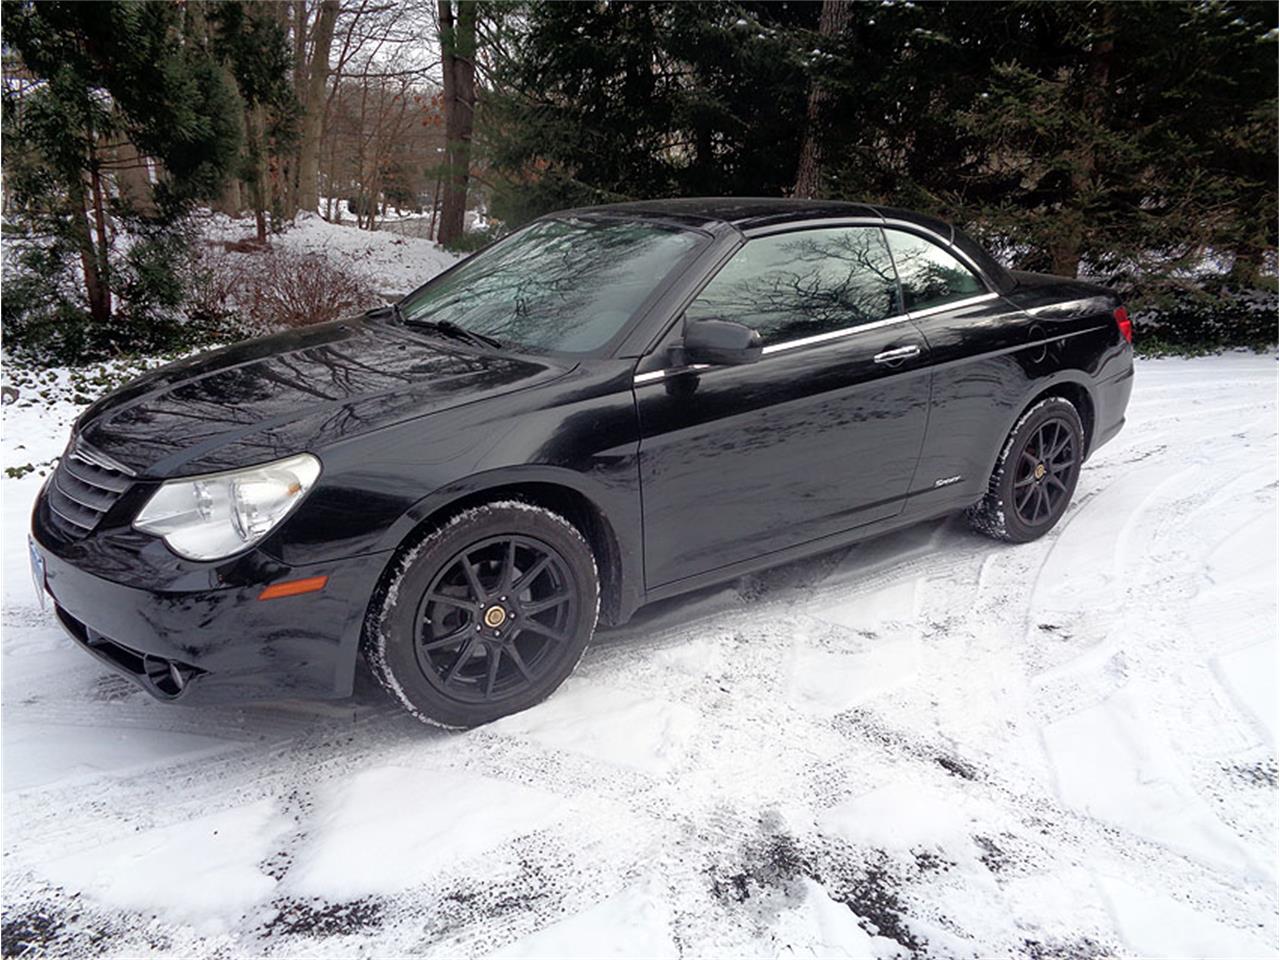 For Sale: 2010 Chrysler Sebring in Cos Cob, Connecticut for sale in Cos Cob, CT